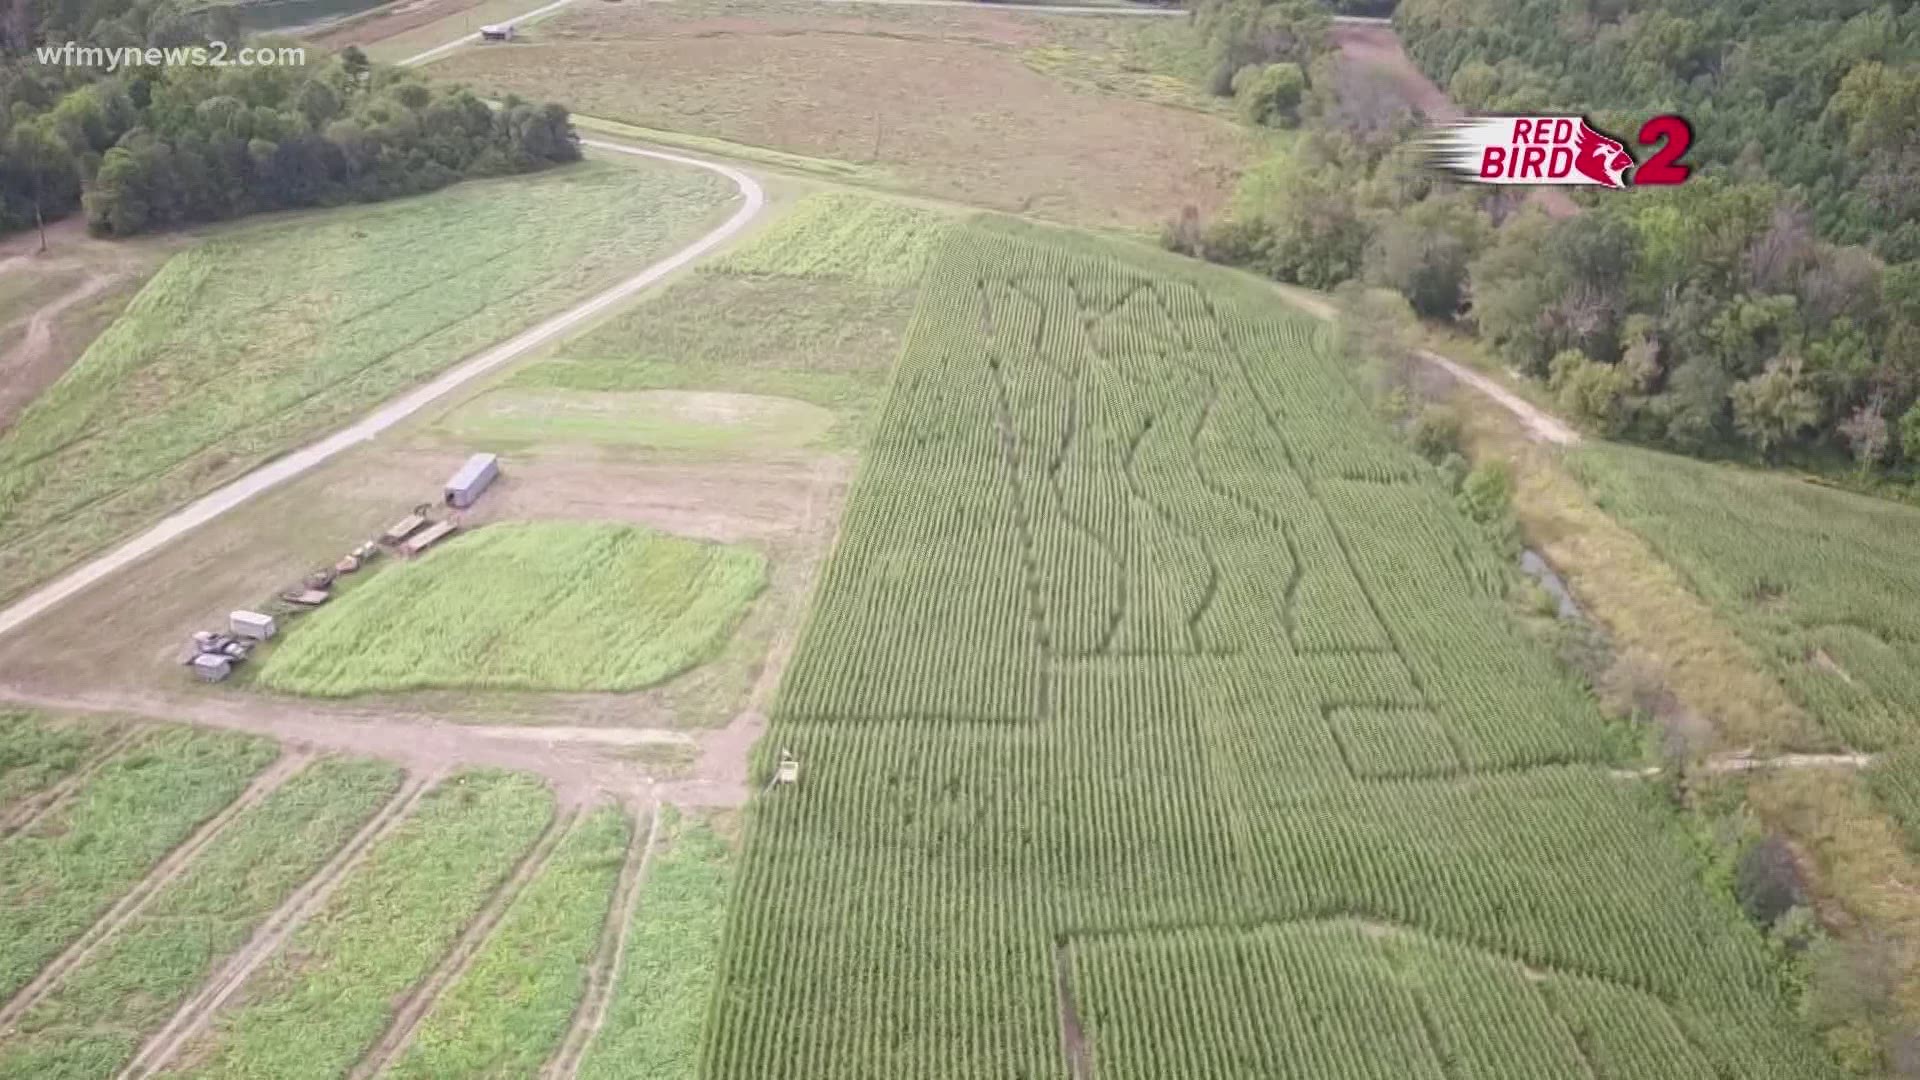 The corn maze is open now at Armstrong Artisan Farm in Stokes County.